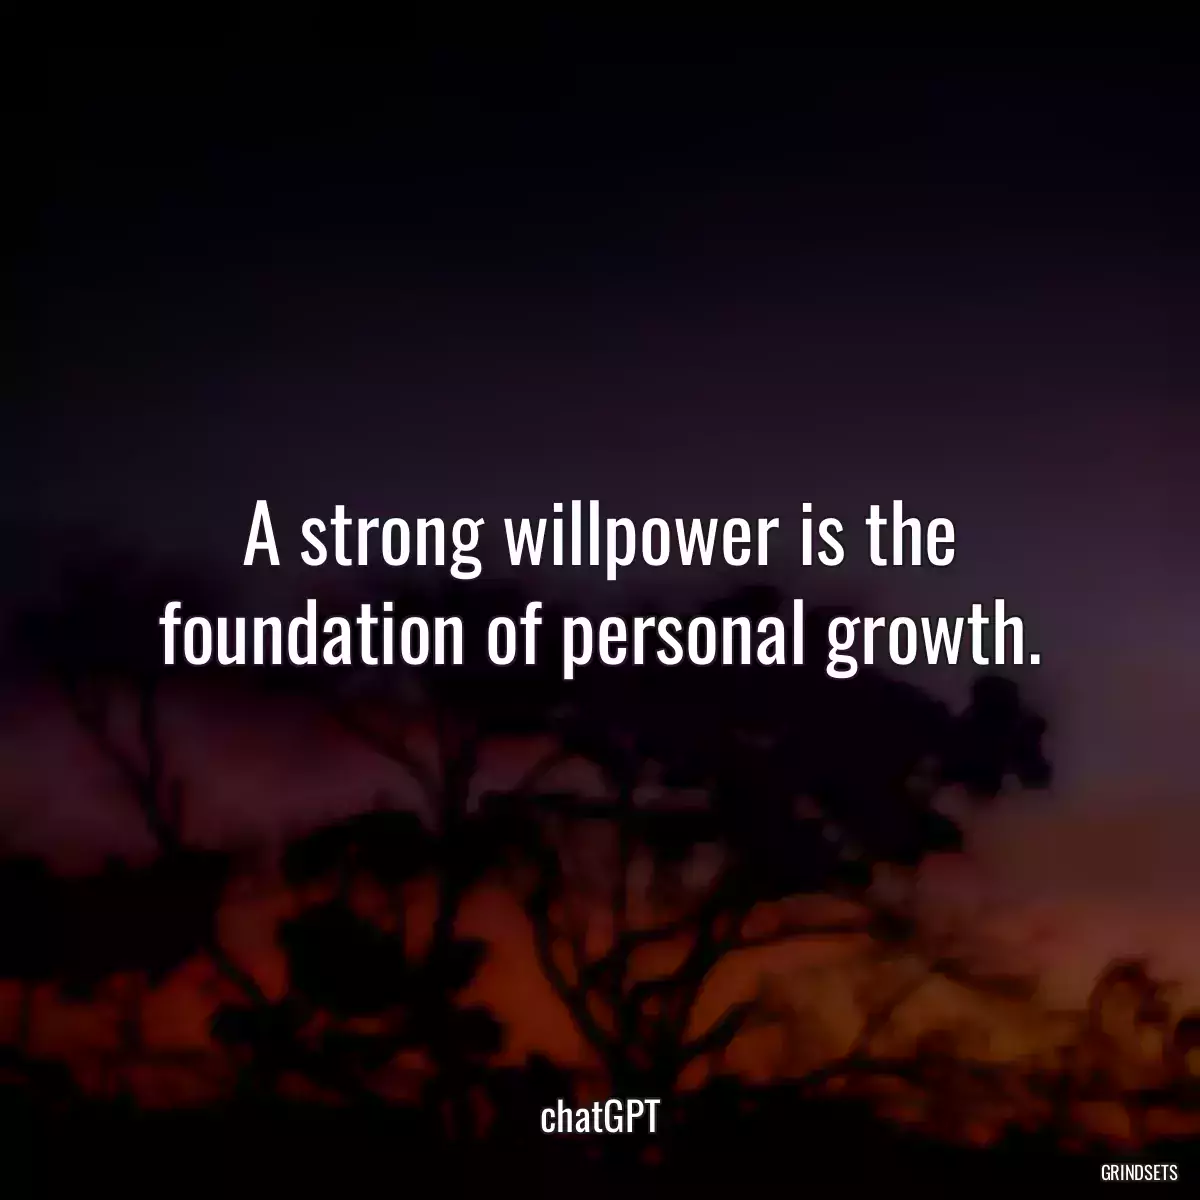 A strong willpower is the foundation of personal growth.